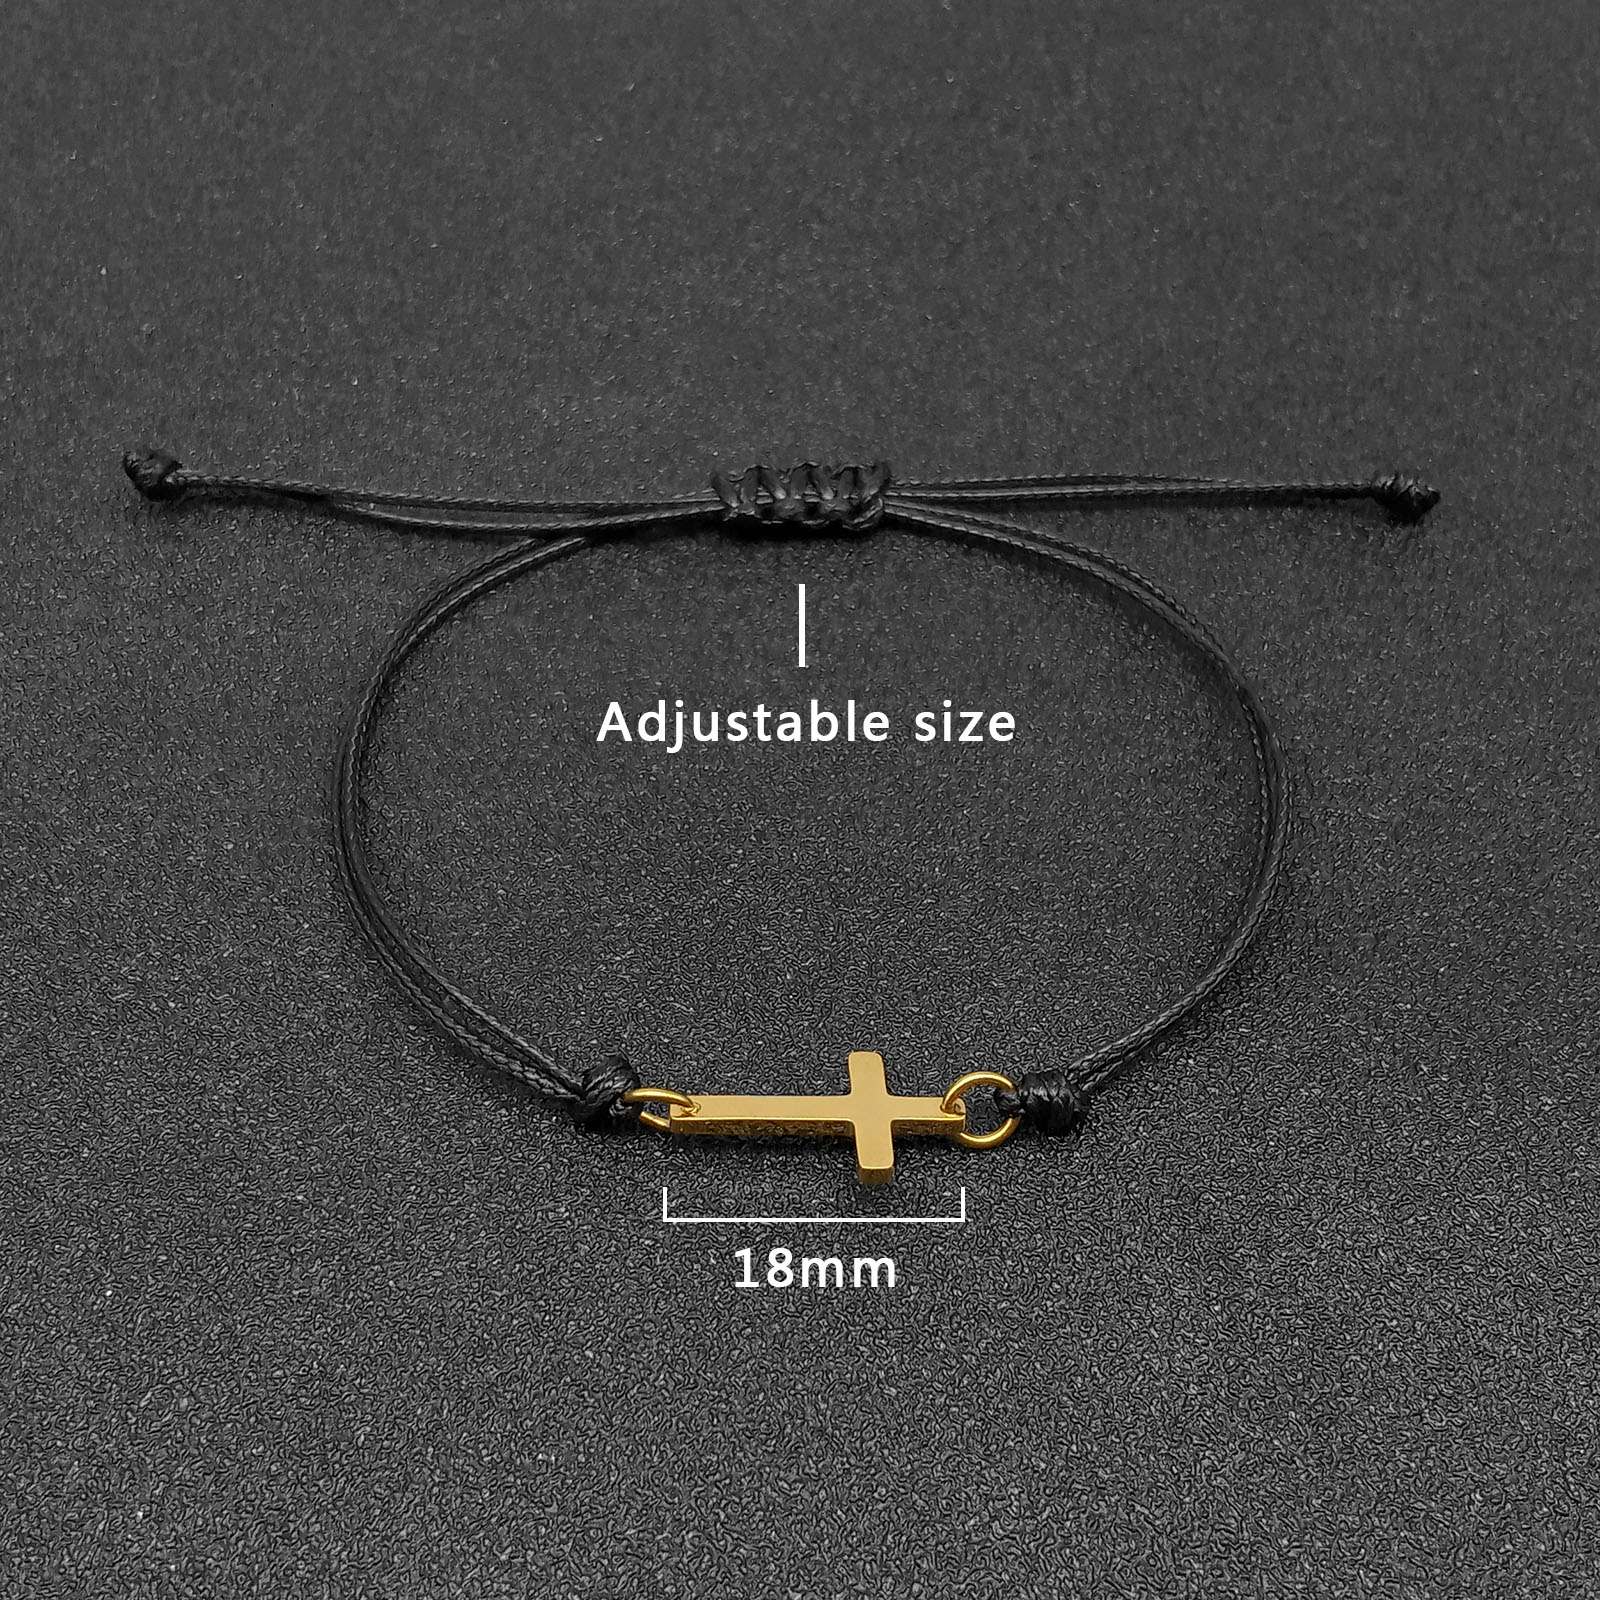 The cross is approximately 18mm long and the bracelet can be adjusted in size